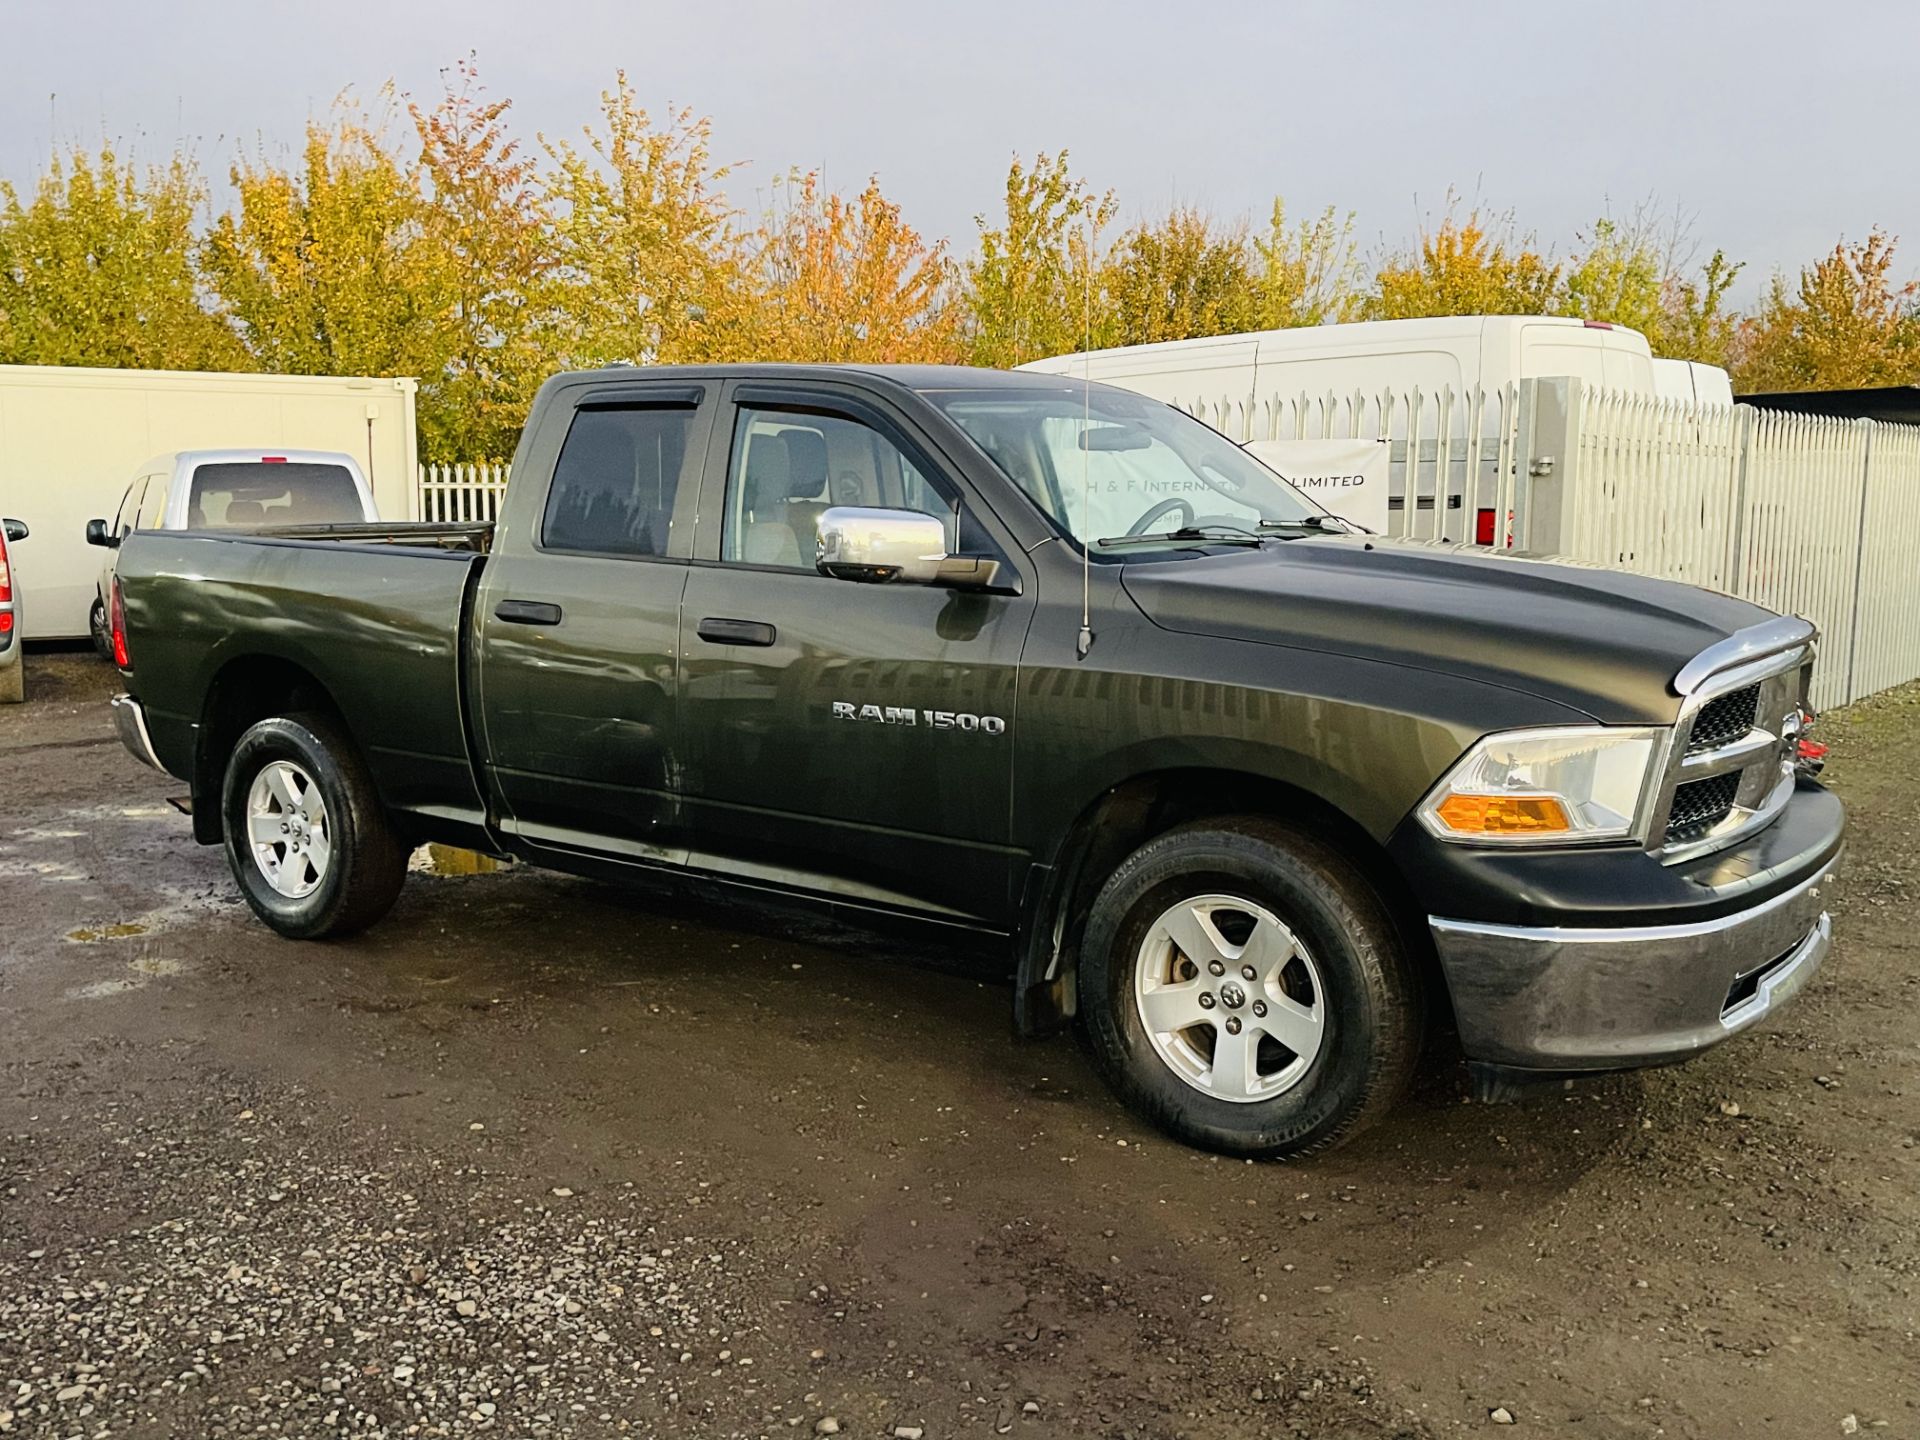 ** ON SALE **Dodge Ram 4.7 V8 1500 ST 4WD ' 2012 Year ' A/C - Cruise Control - 6 Seats Chrome Pack - Image 7 of 27